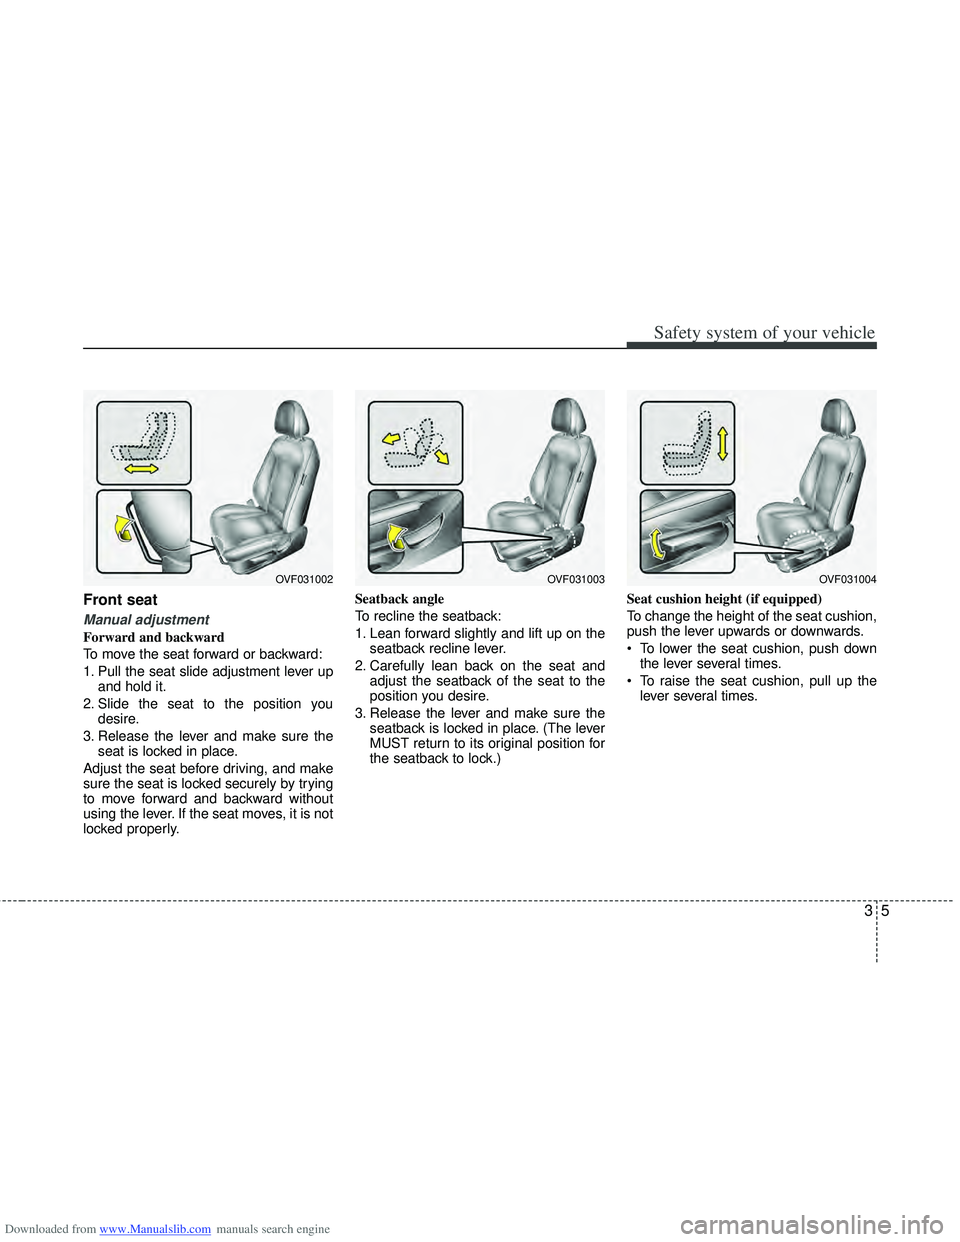 HYUNDAI I40 2016  Owners Manual Downloaded from www.Manualslib.com manuals search engine 35
Safety system of your vehicle
Front seat 
Manual adjustment 
Forward and backward
To move the seat forward or backward:
1. Pull the seat sli